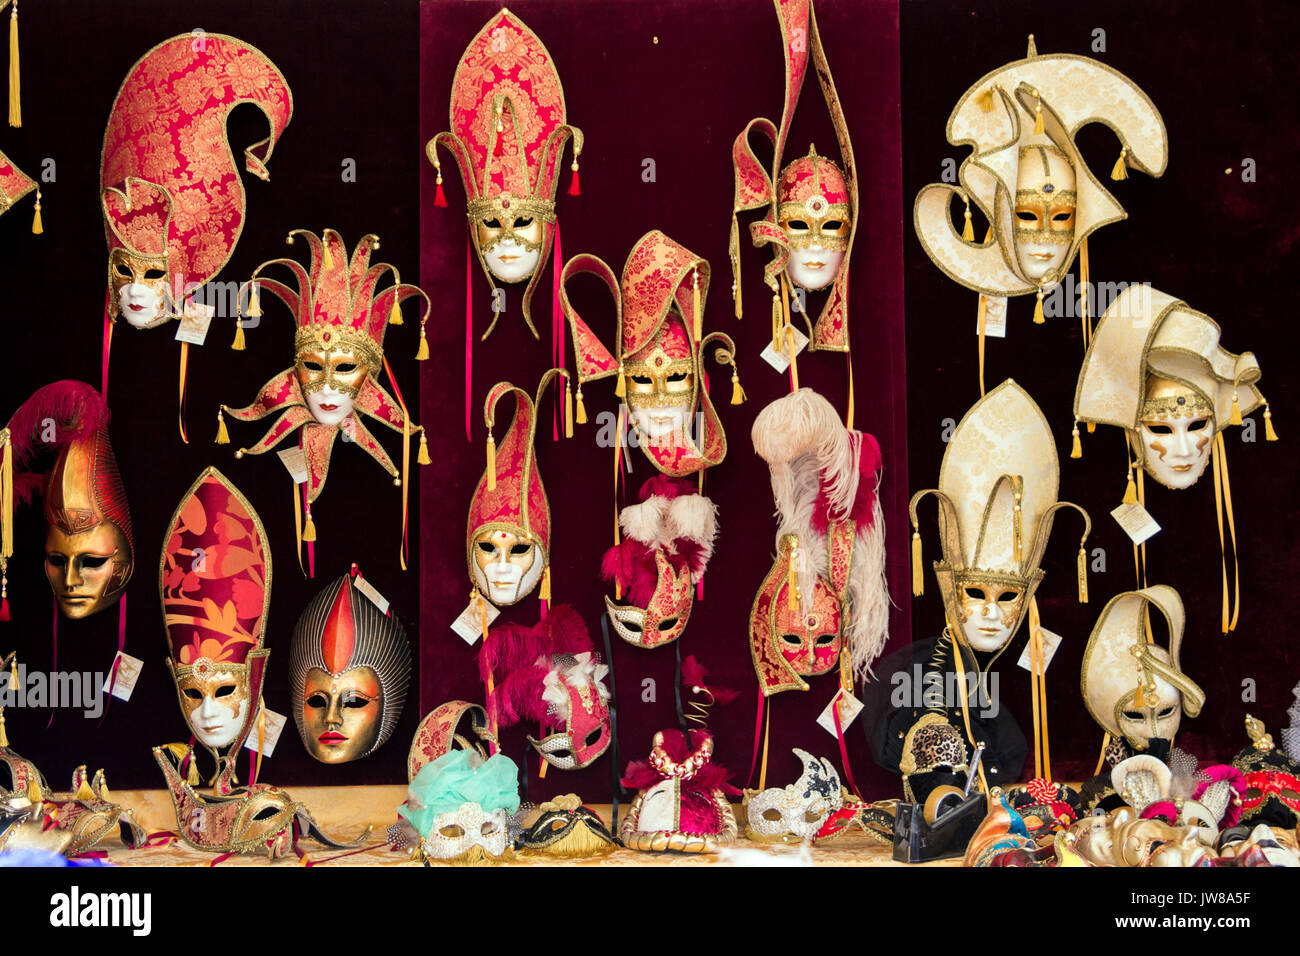 VENICE, ITALY - FEB 7, 2013: Shop window with carnival masks in a small street during the Carnival days in Venice. Stock Photo